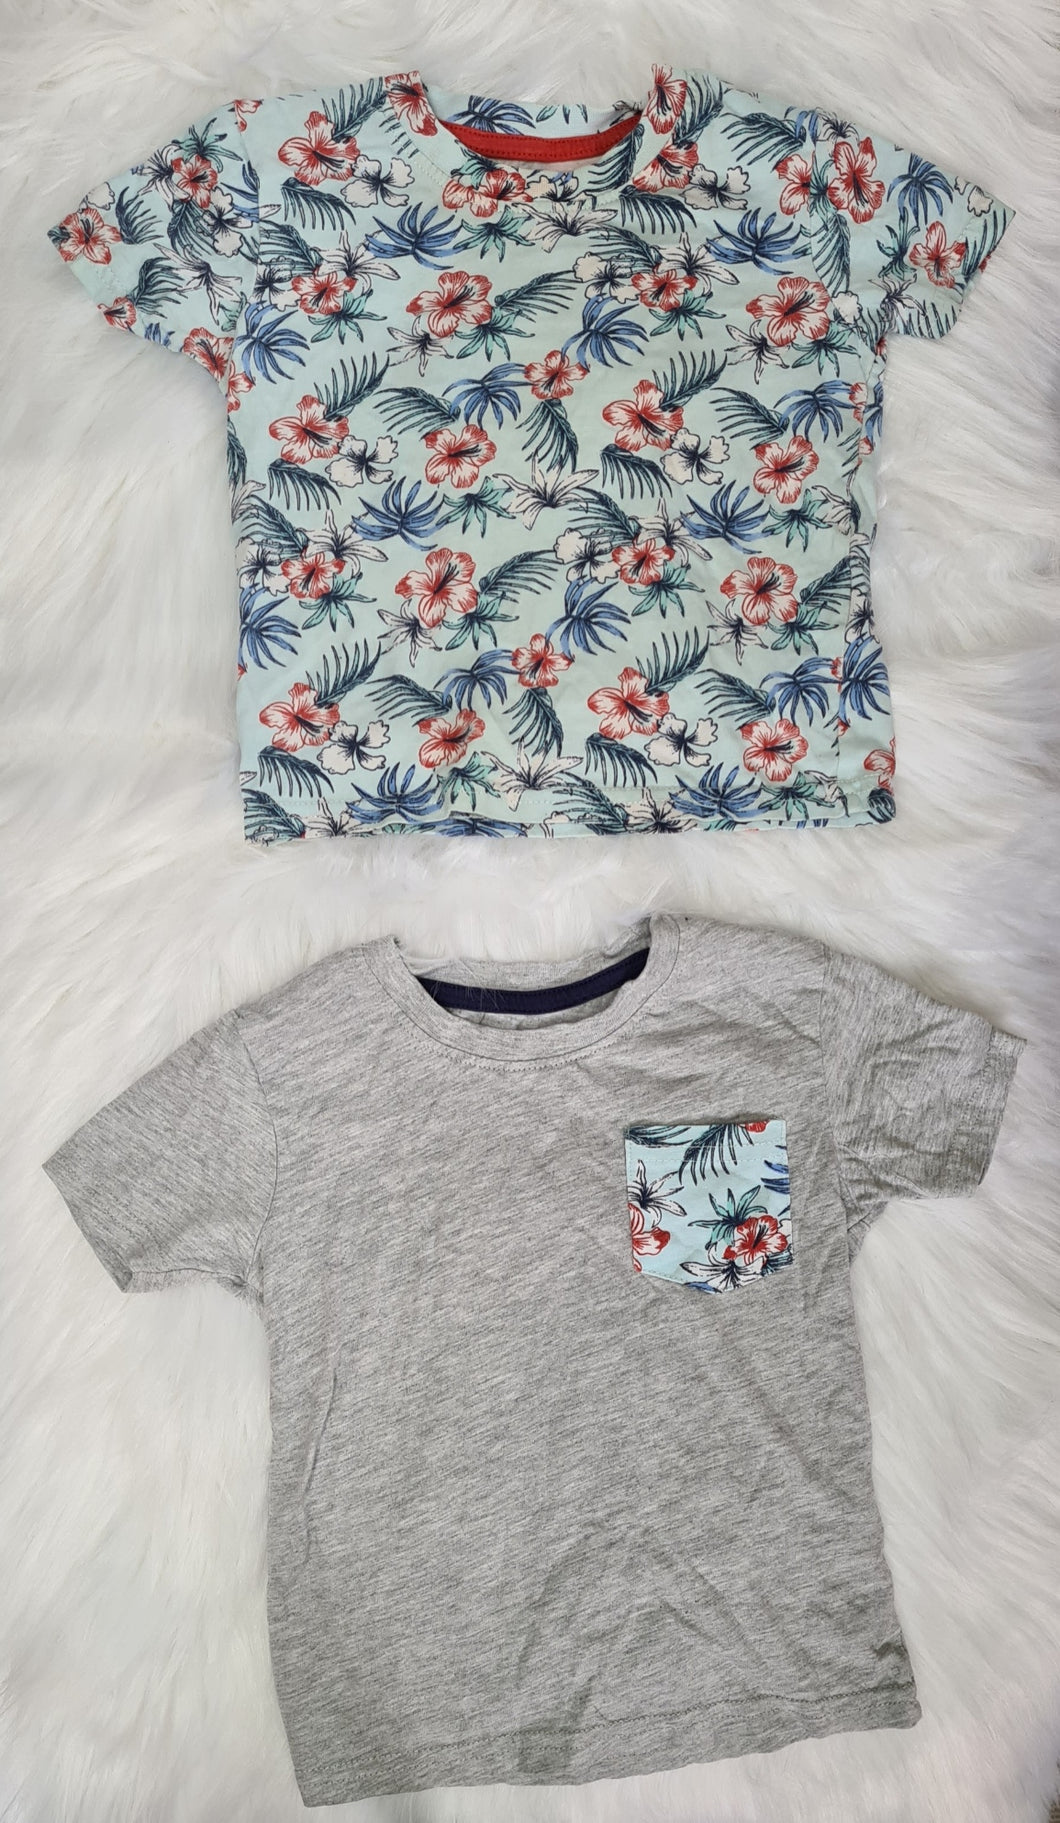 Boys 9-12 Months - Primark - Grey and Flower Tops